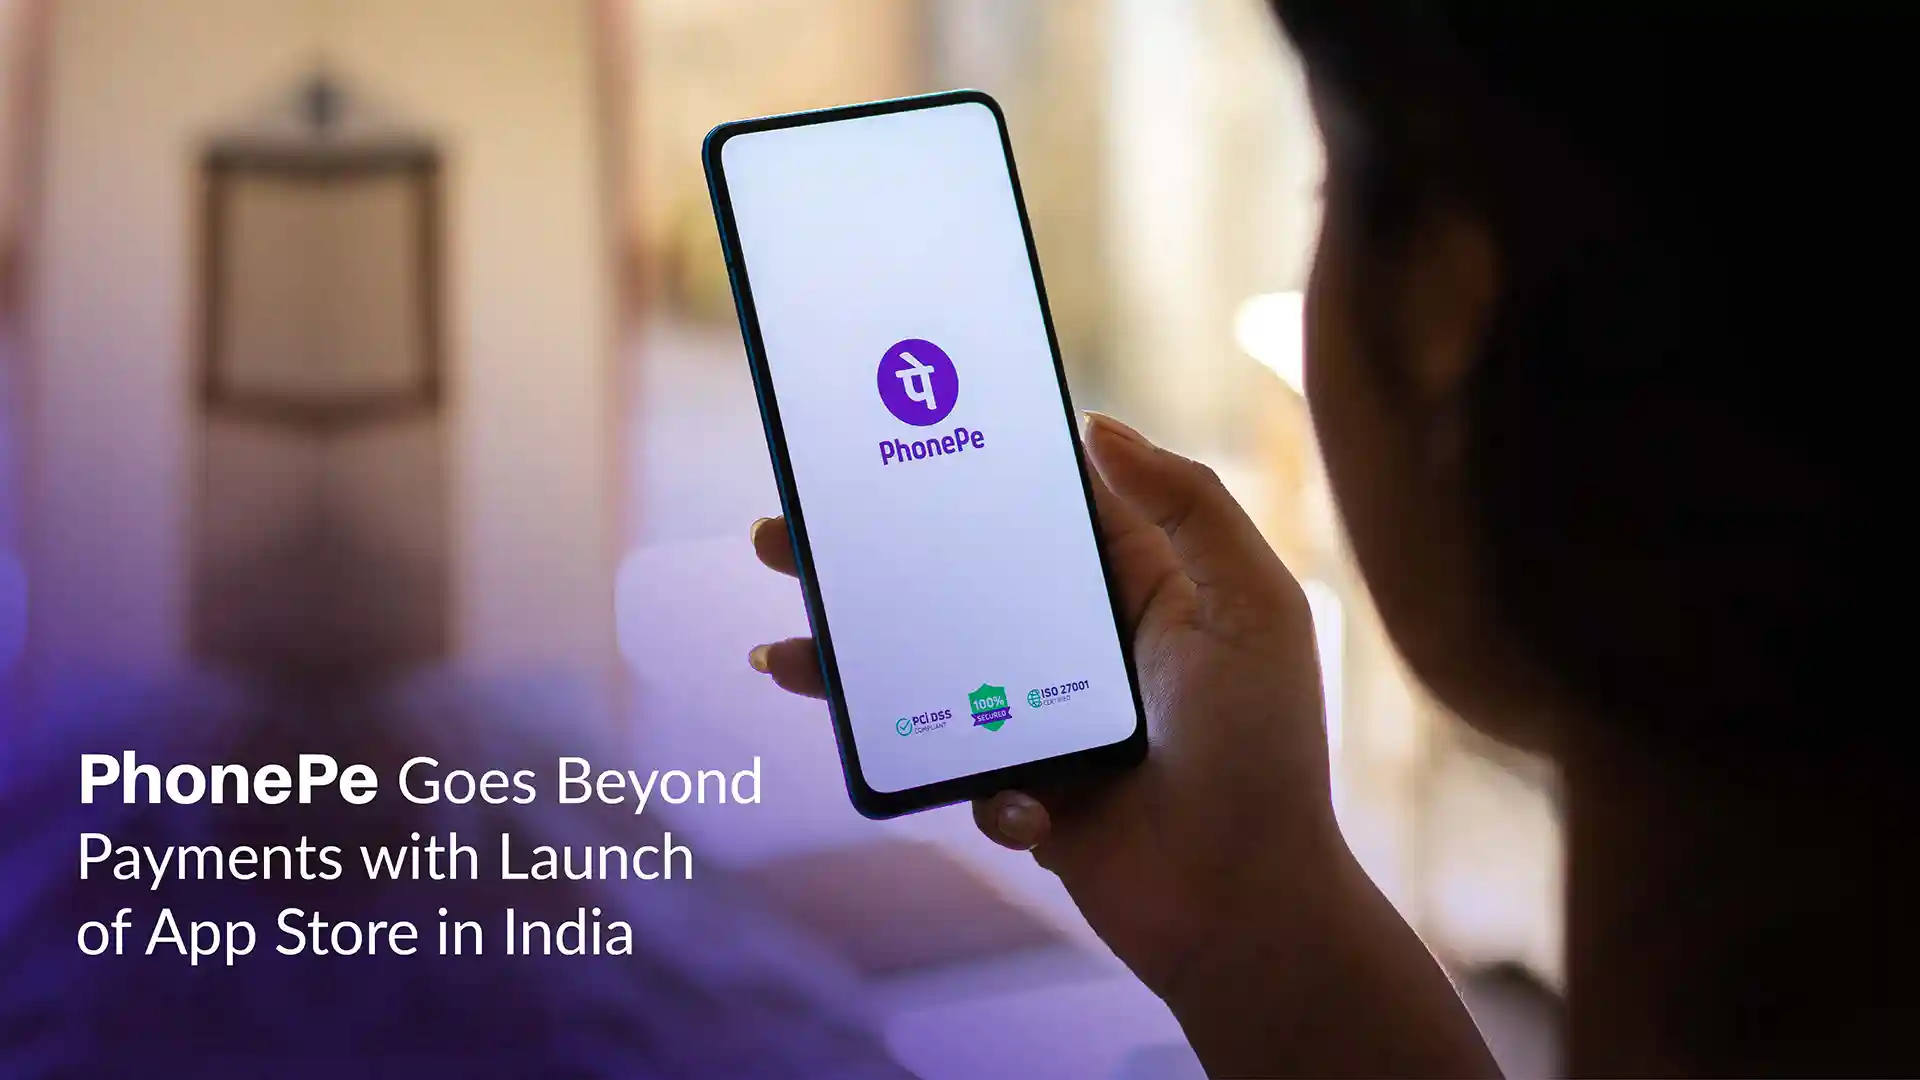 PhonePe Goes Beyond Payments with Launch of App Store in India